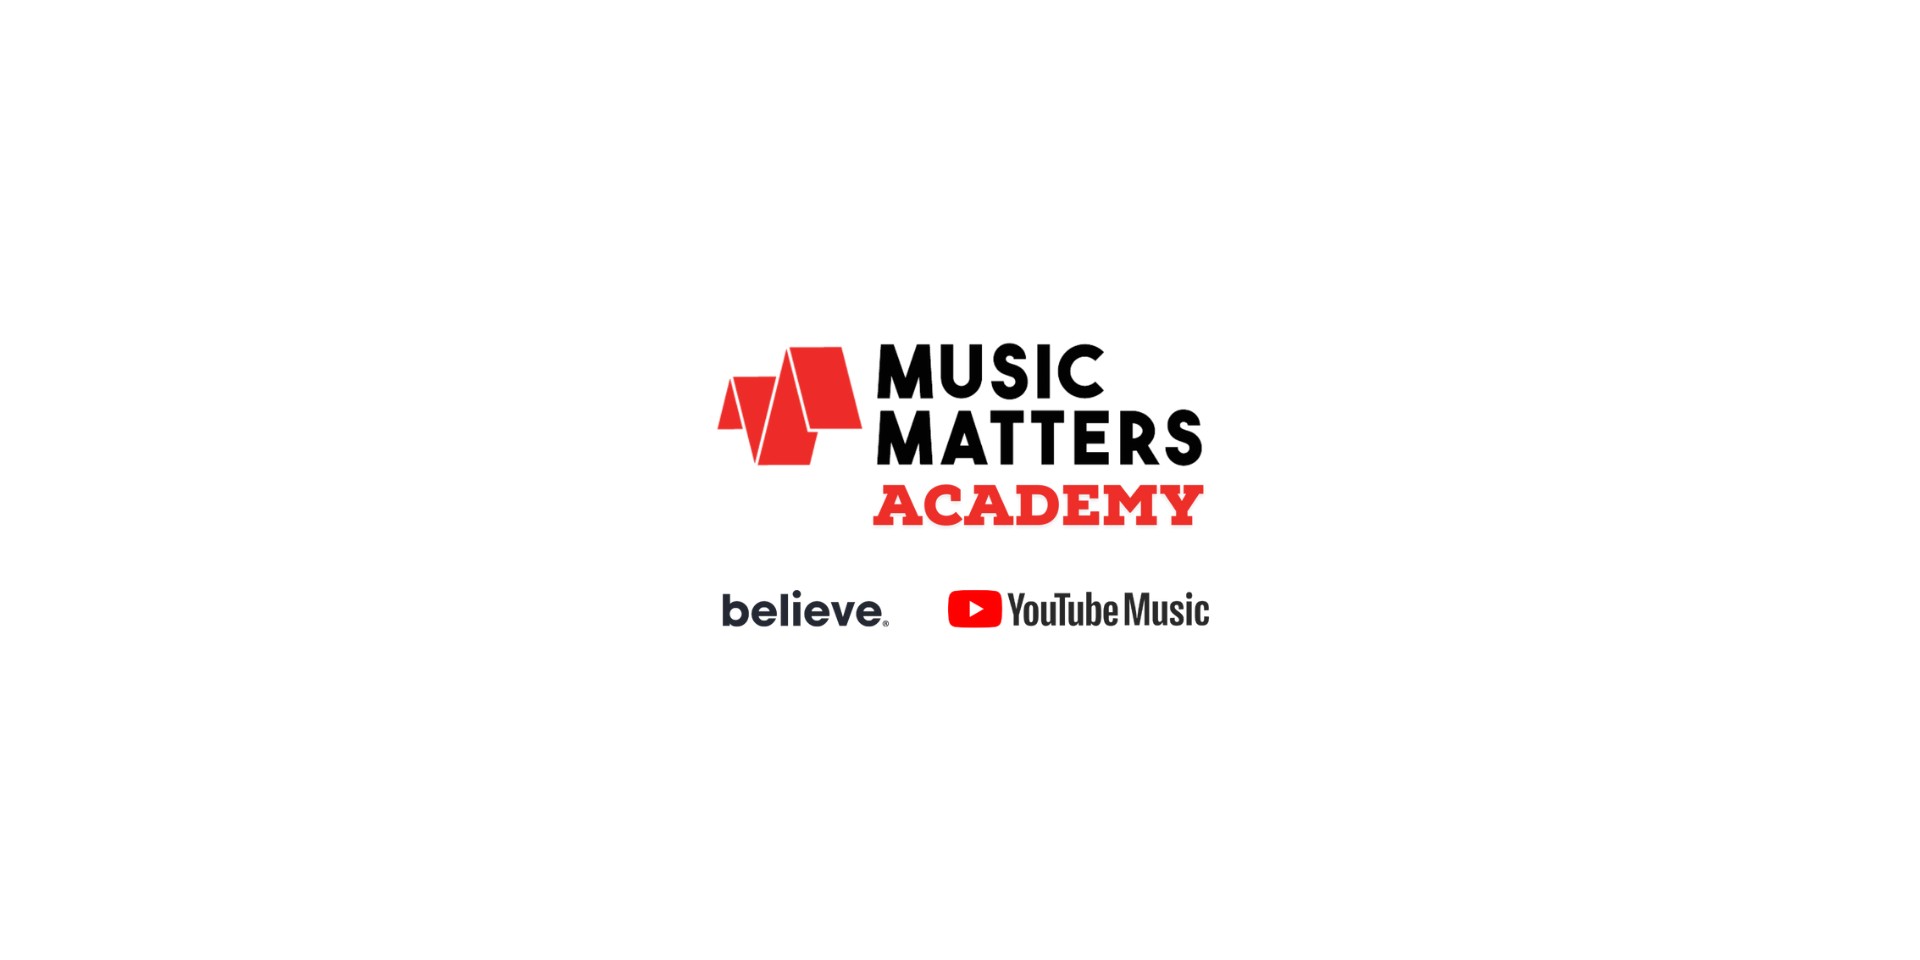 Music Matters Academy connects artists, industry newcomers and young executives to music experts and recipes for success